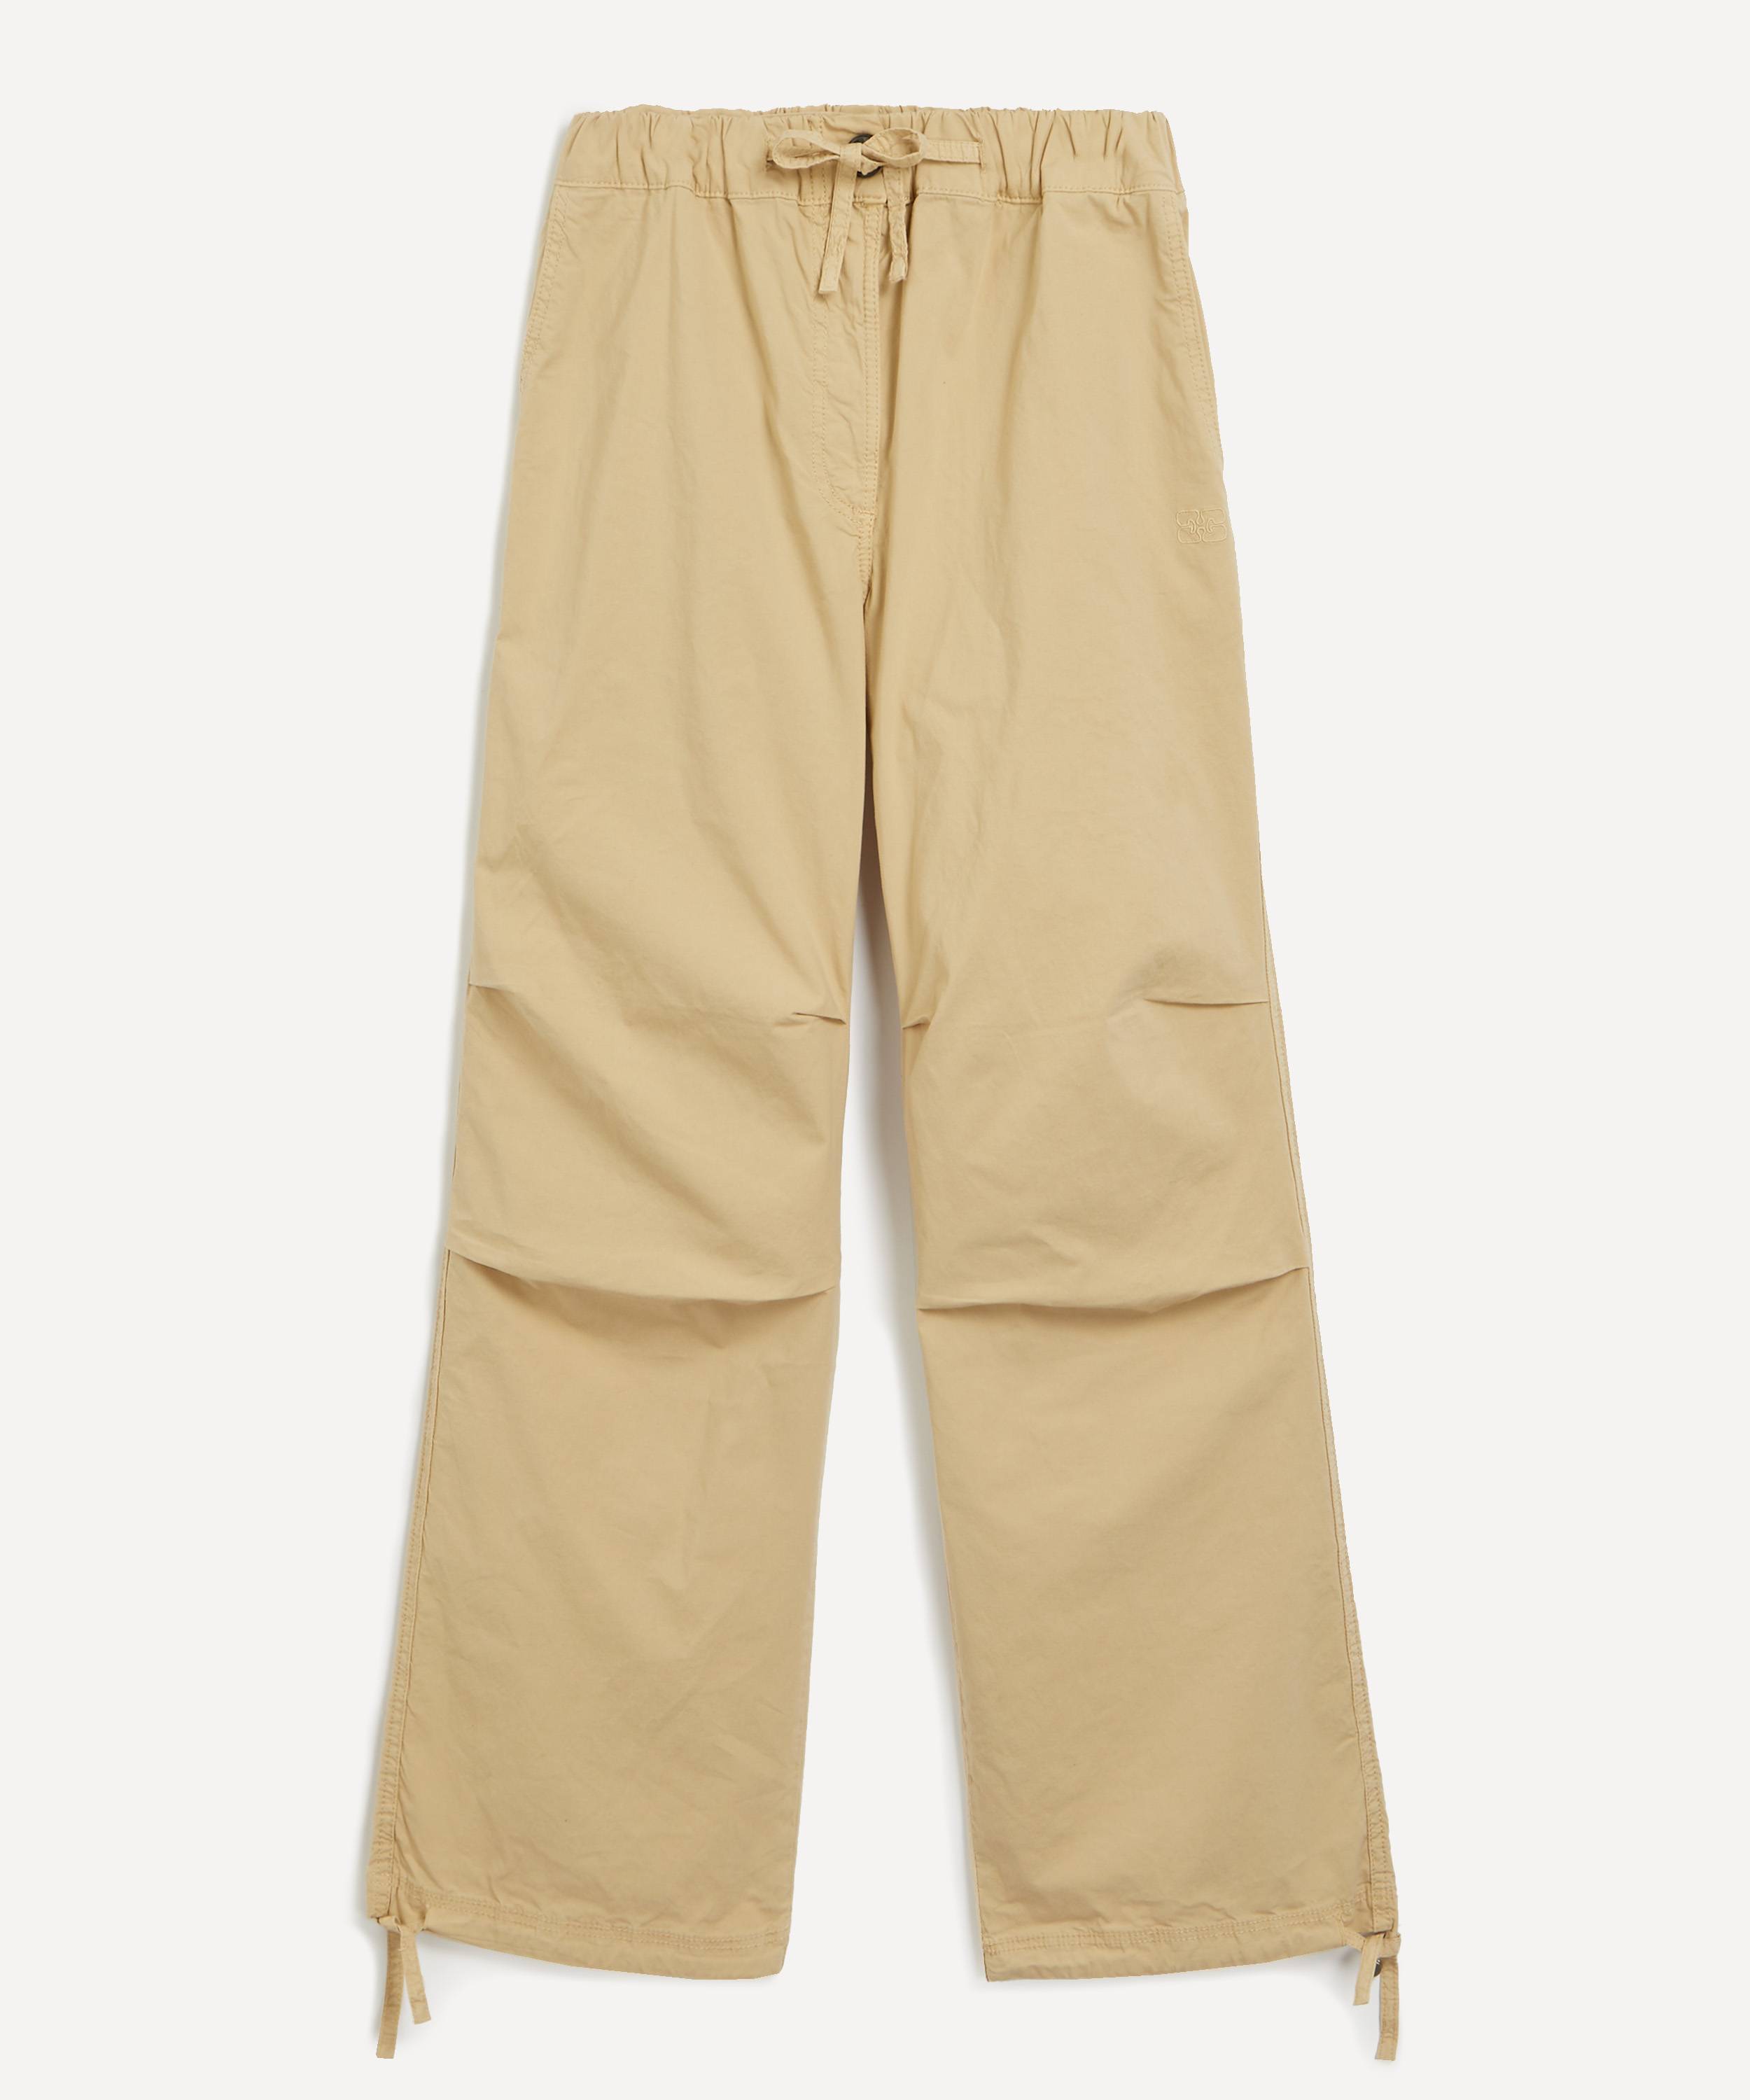 Ganni Washed Cotton Canvas Draw-String Trousers | Liberty